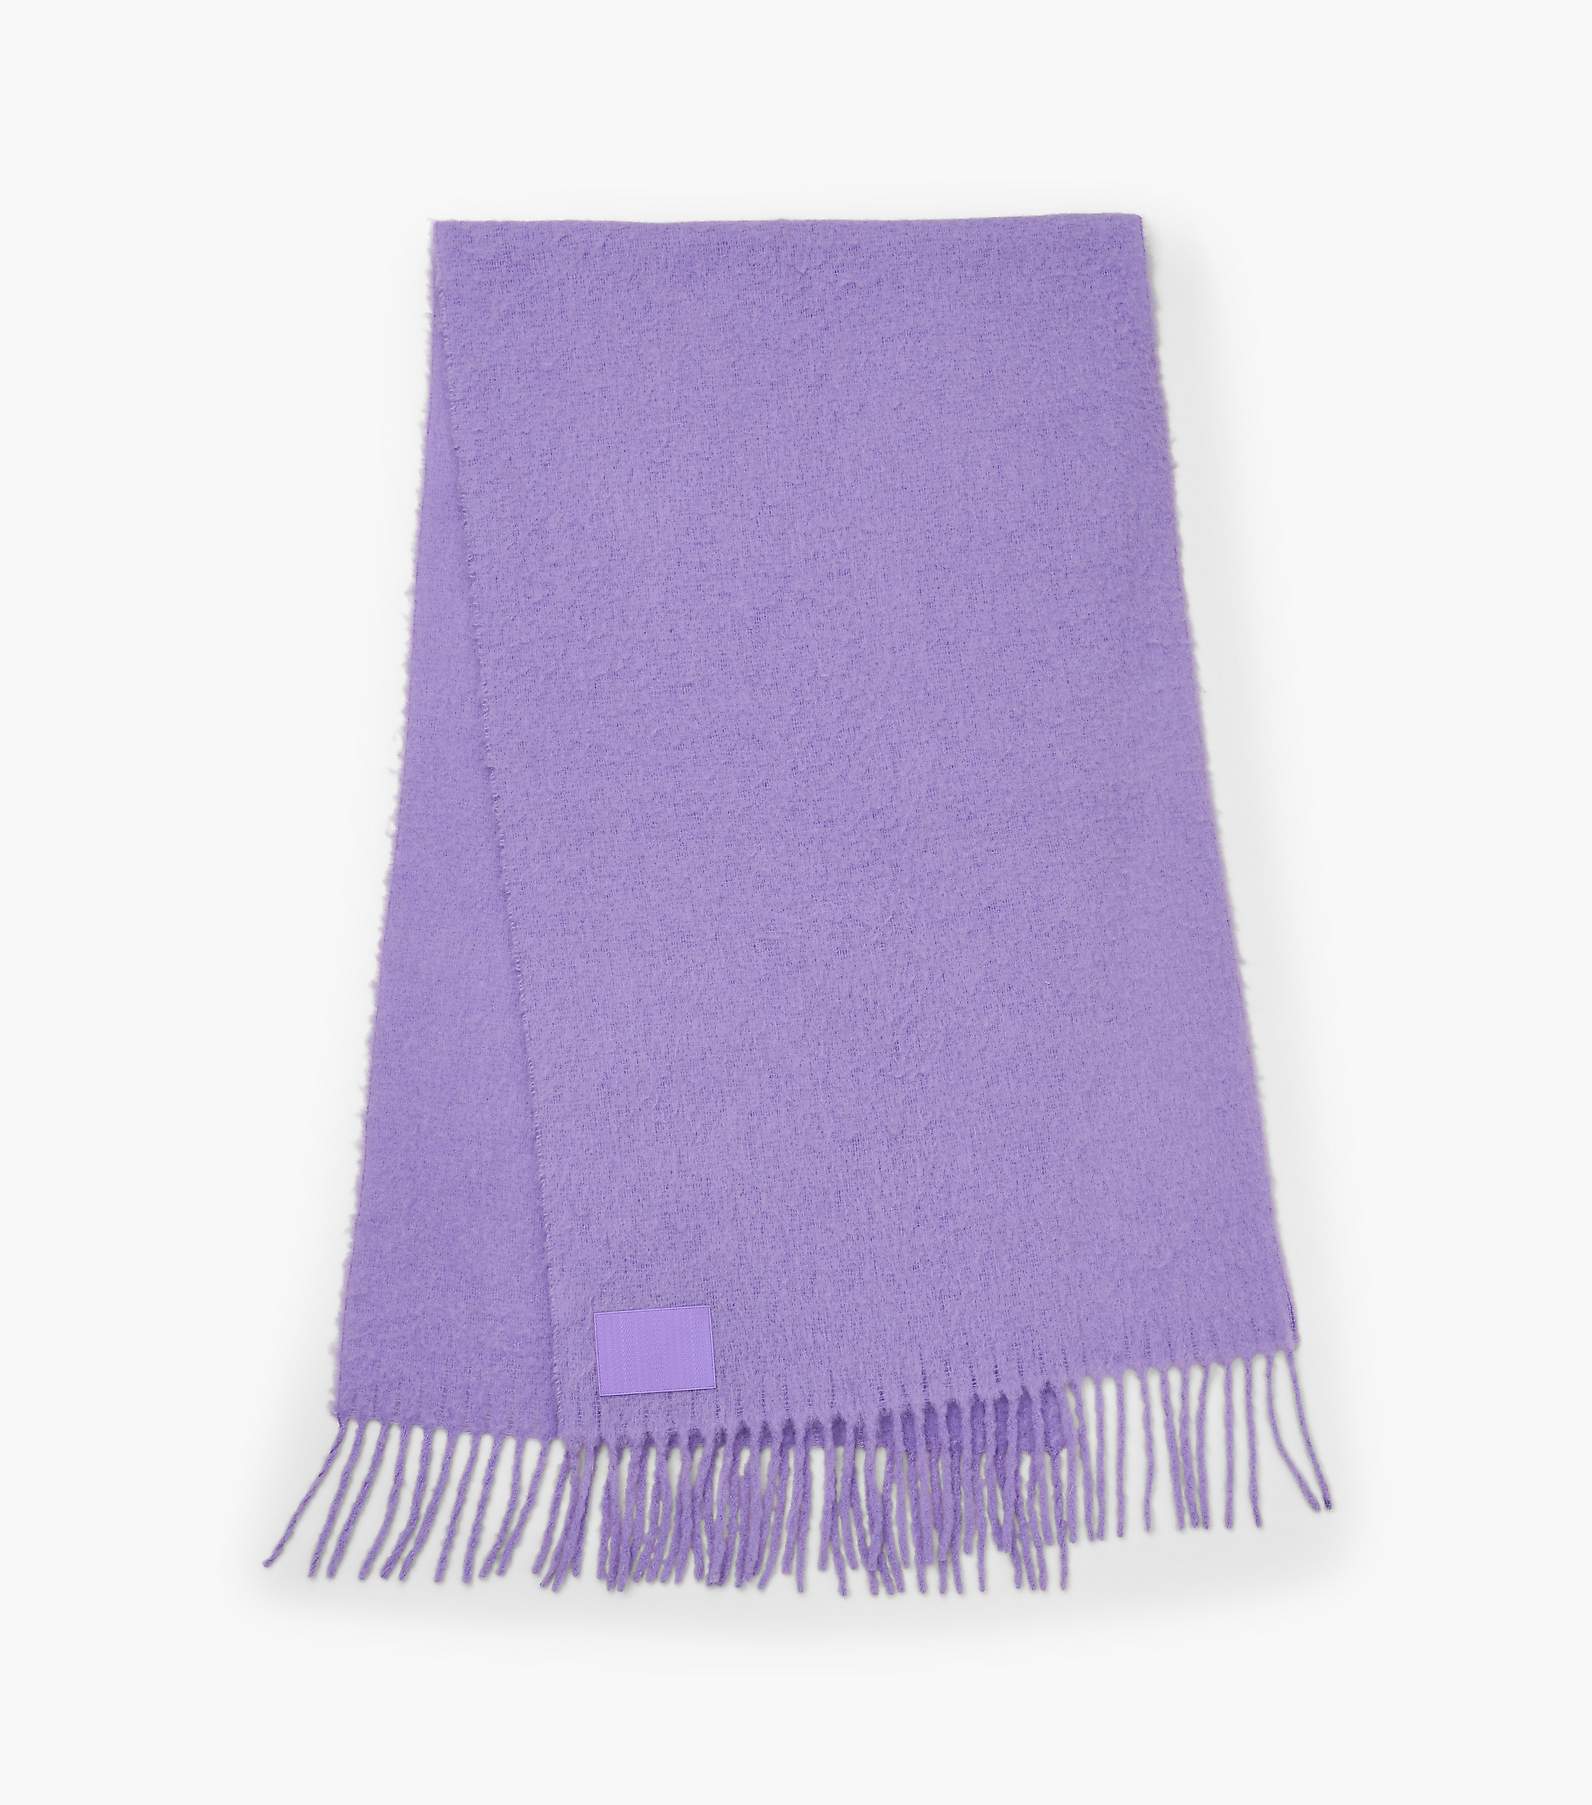 FRINGED SCARF IN MONOGRAM CASHMERE - BLACK / TOFFEE